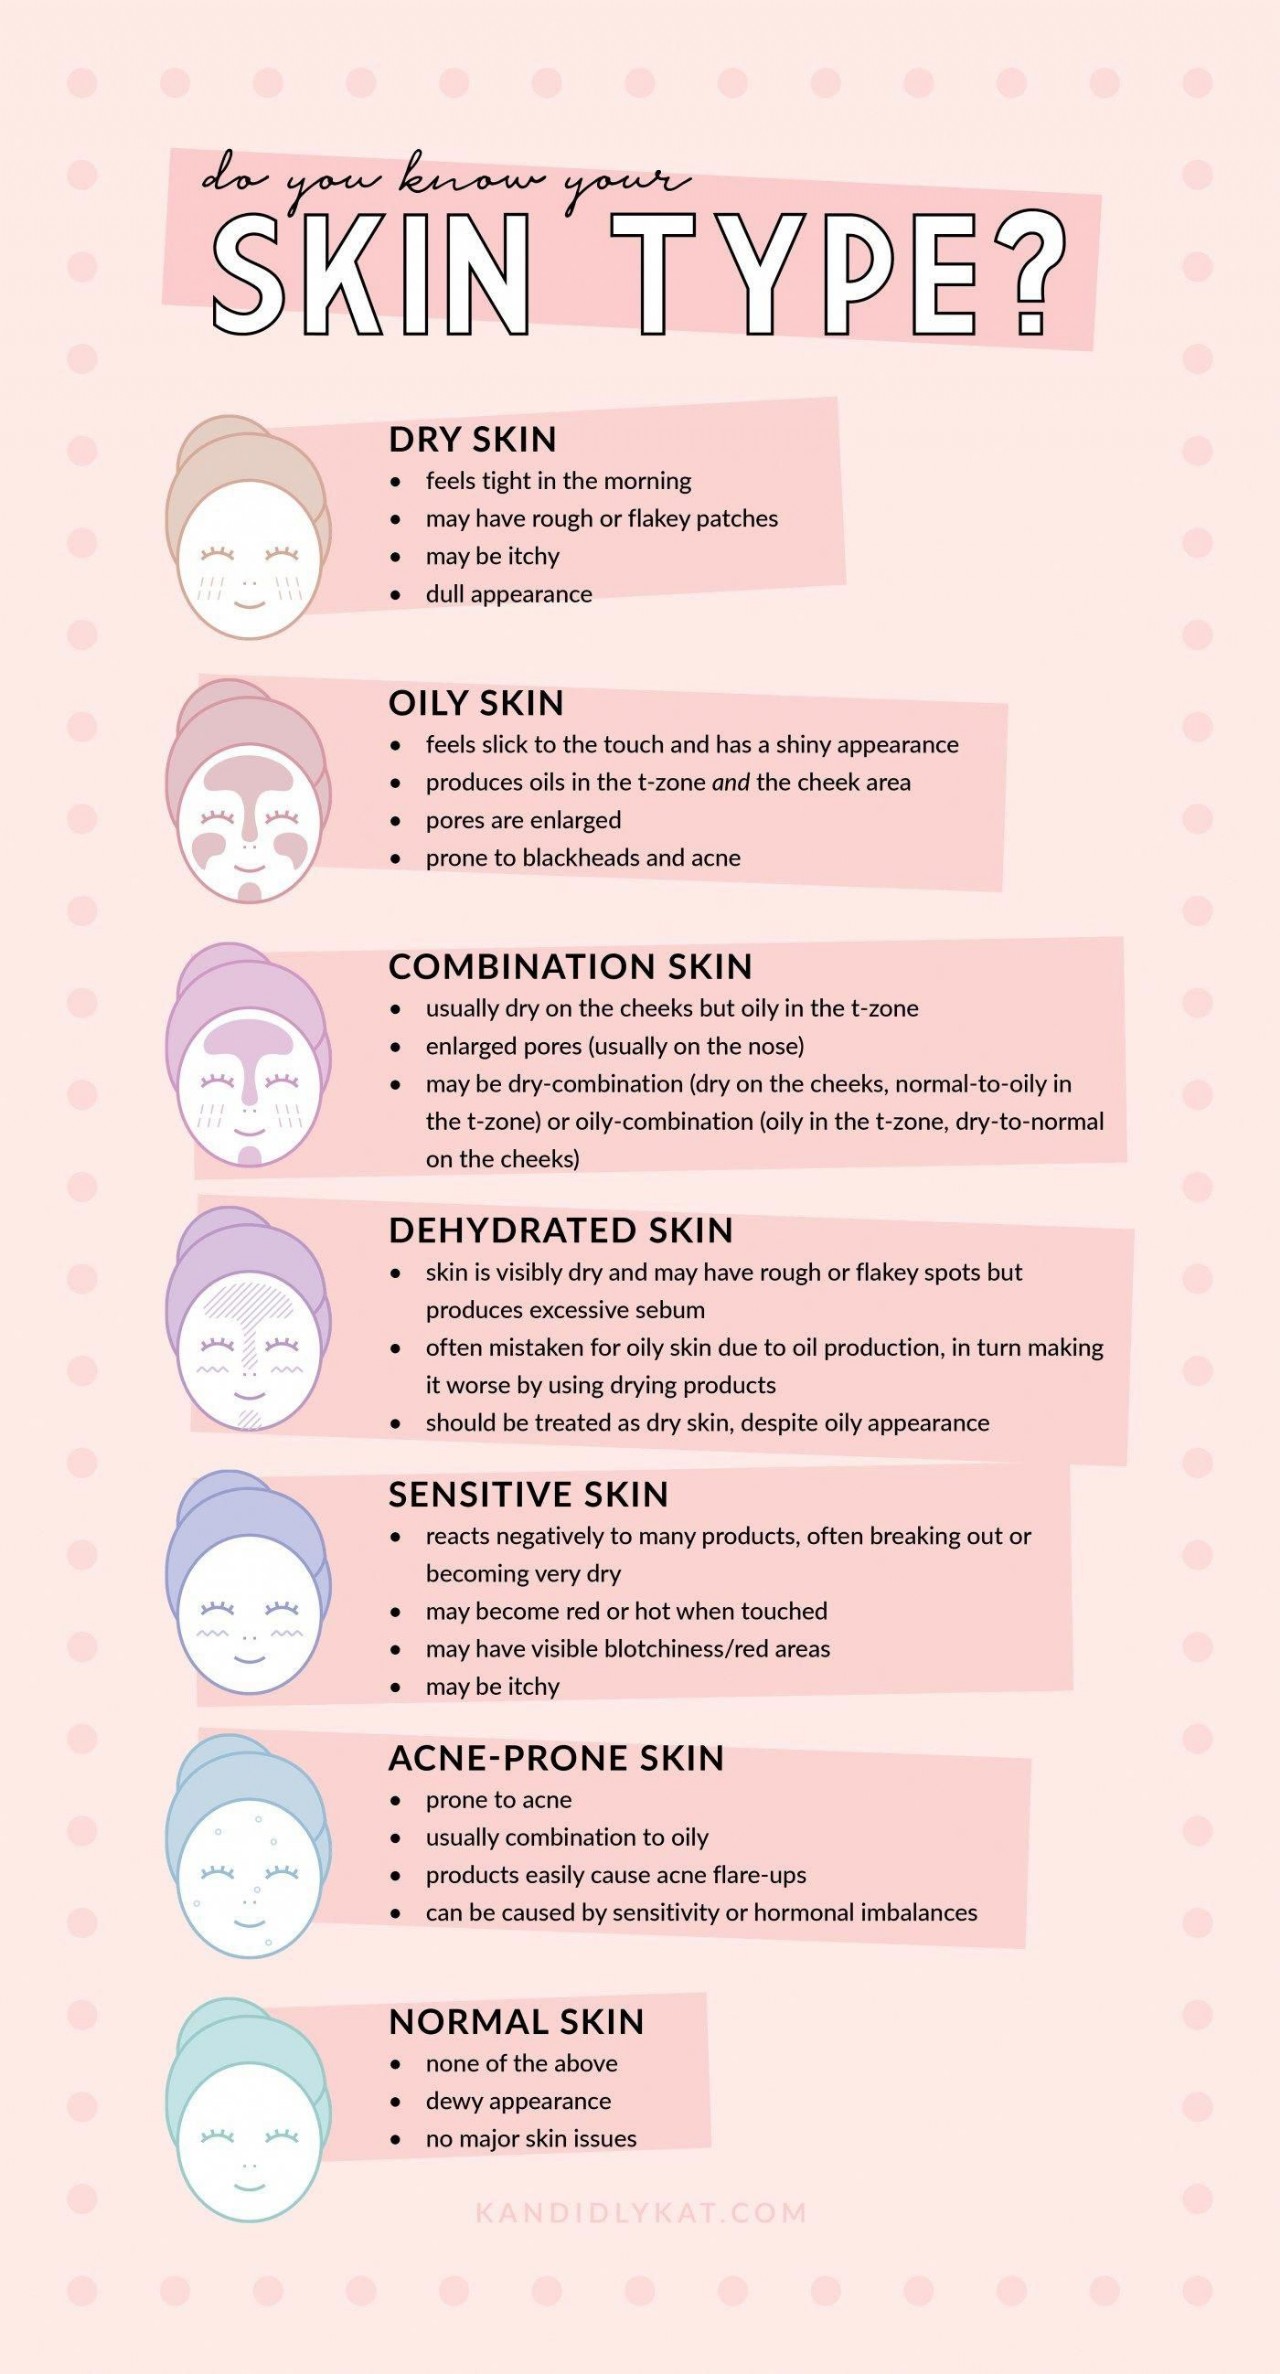 What are some effective skincare routines for different skin types?